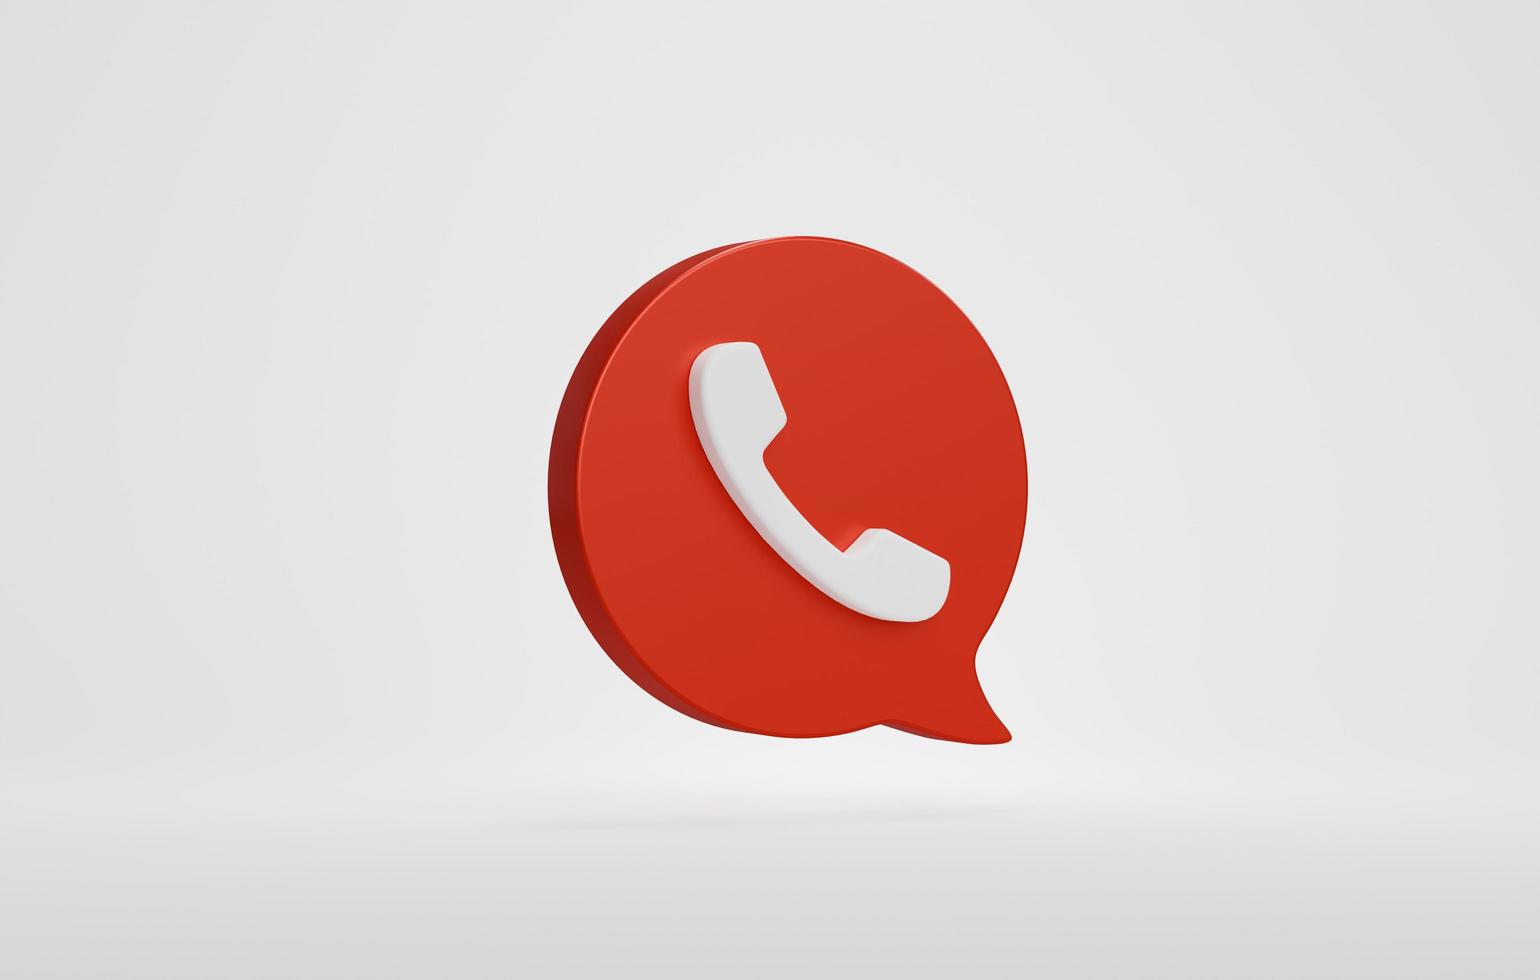 Red phone icon or contact website mobile symbol isolated on white background, service support hotline concept. 3D rendering. photo